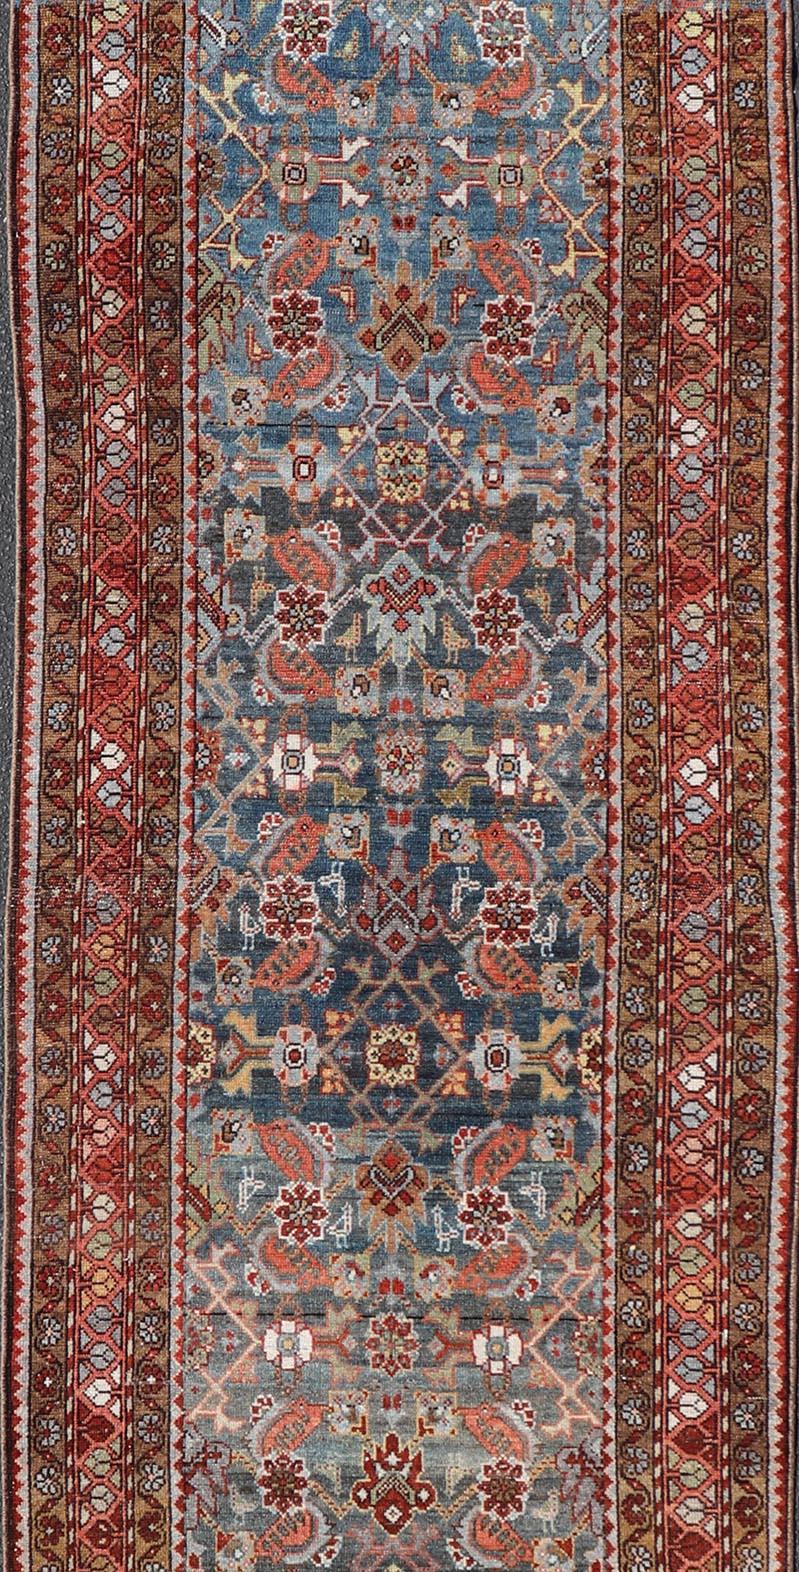 Heriz Serapi N.W. Persian Antique Runner with Geometric Florals Set on a Blue Field For Sale